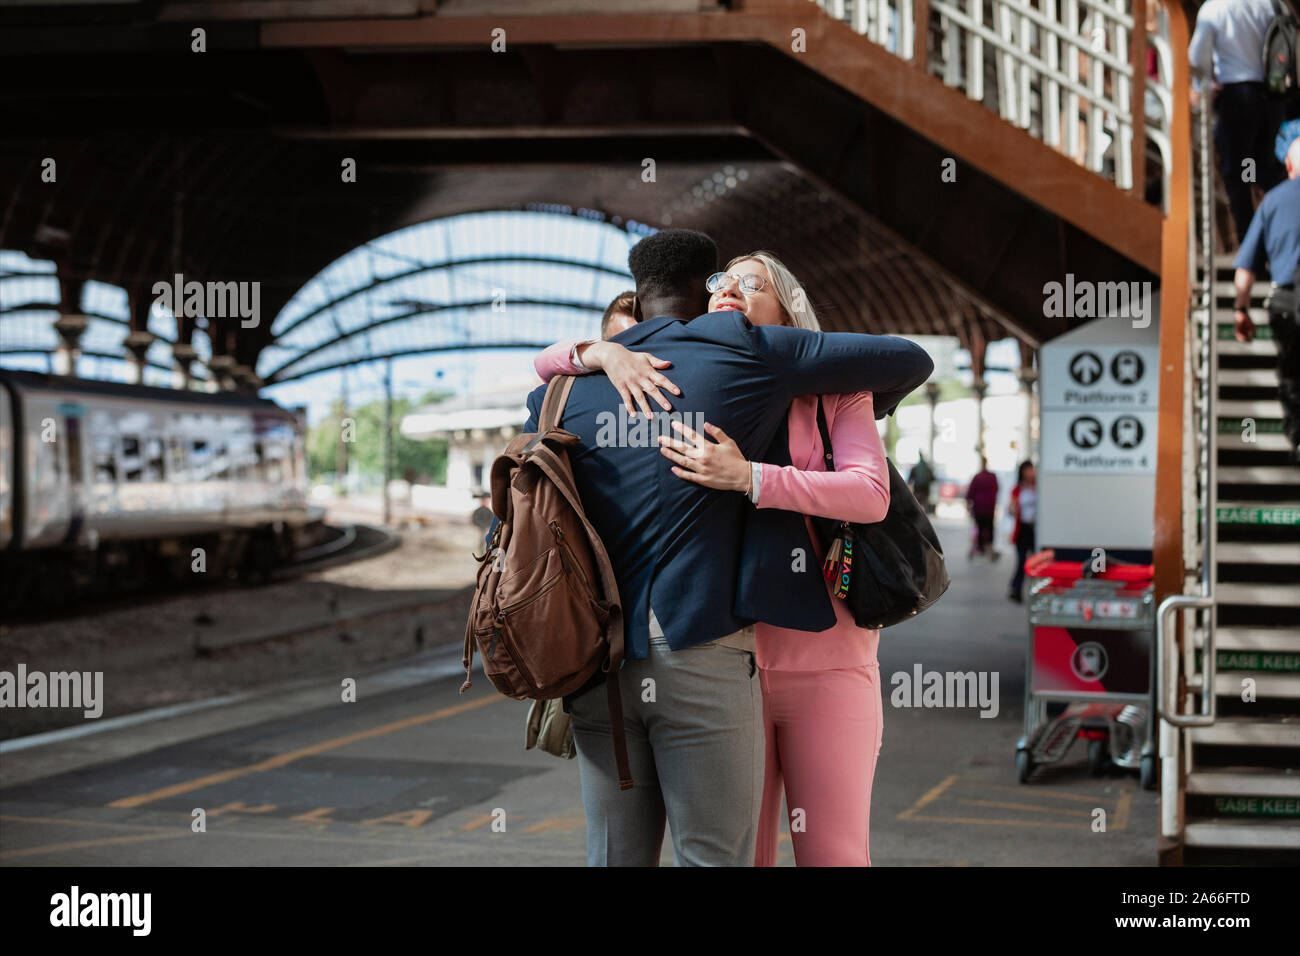 A male and female co-worker parting ways after work. They are hugging each other goodbye. Stock Photo